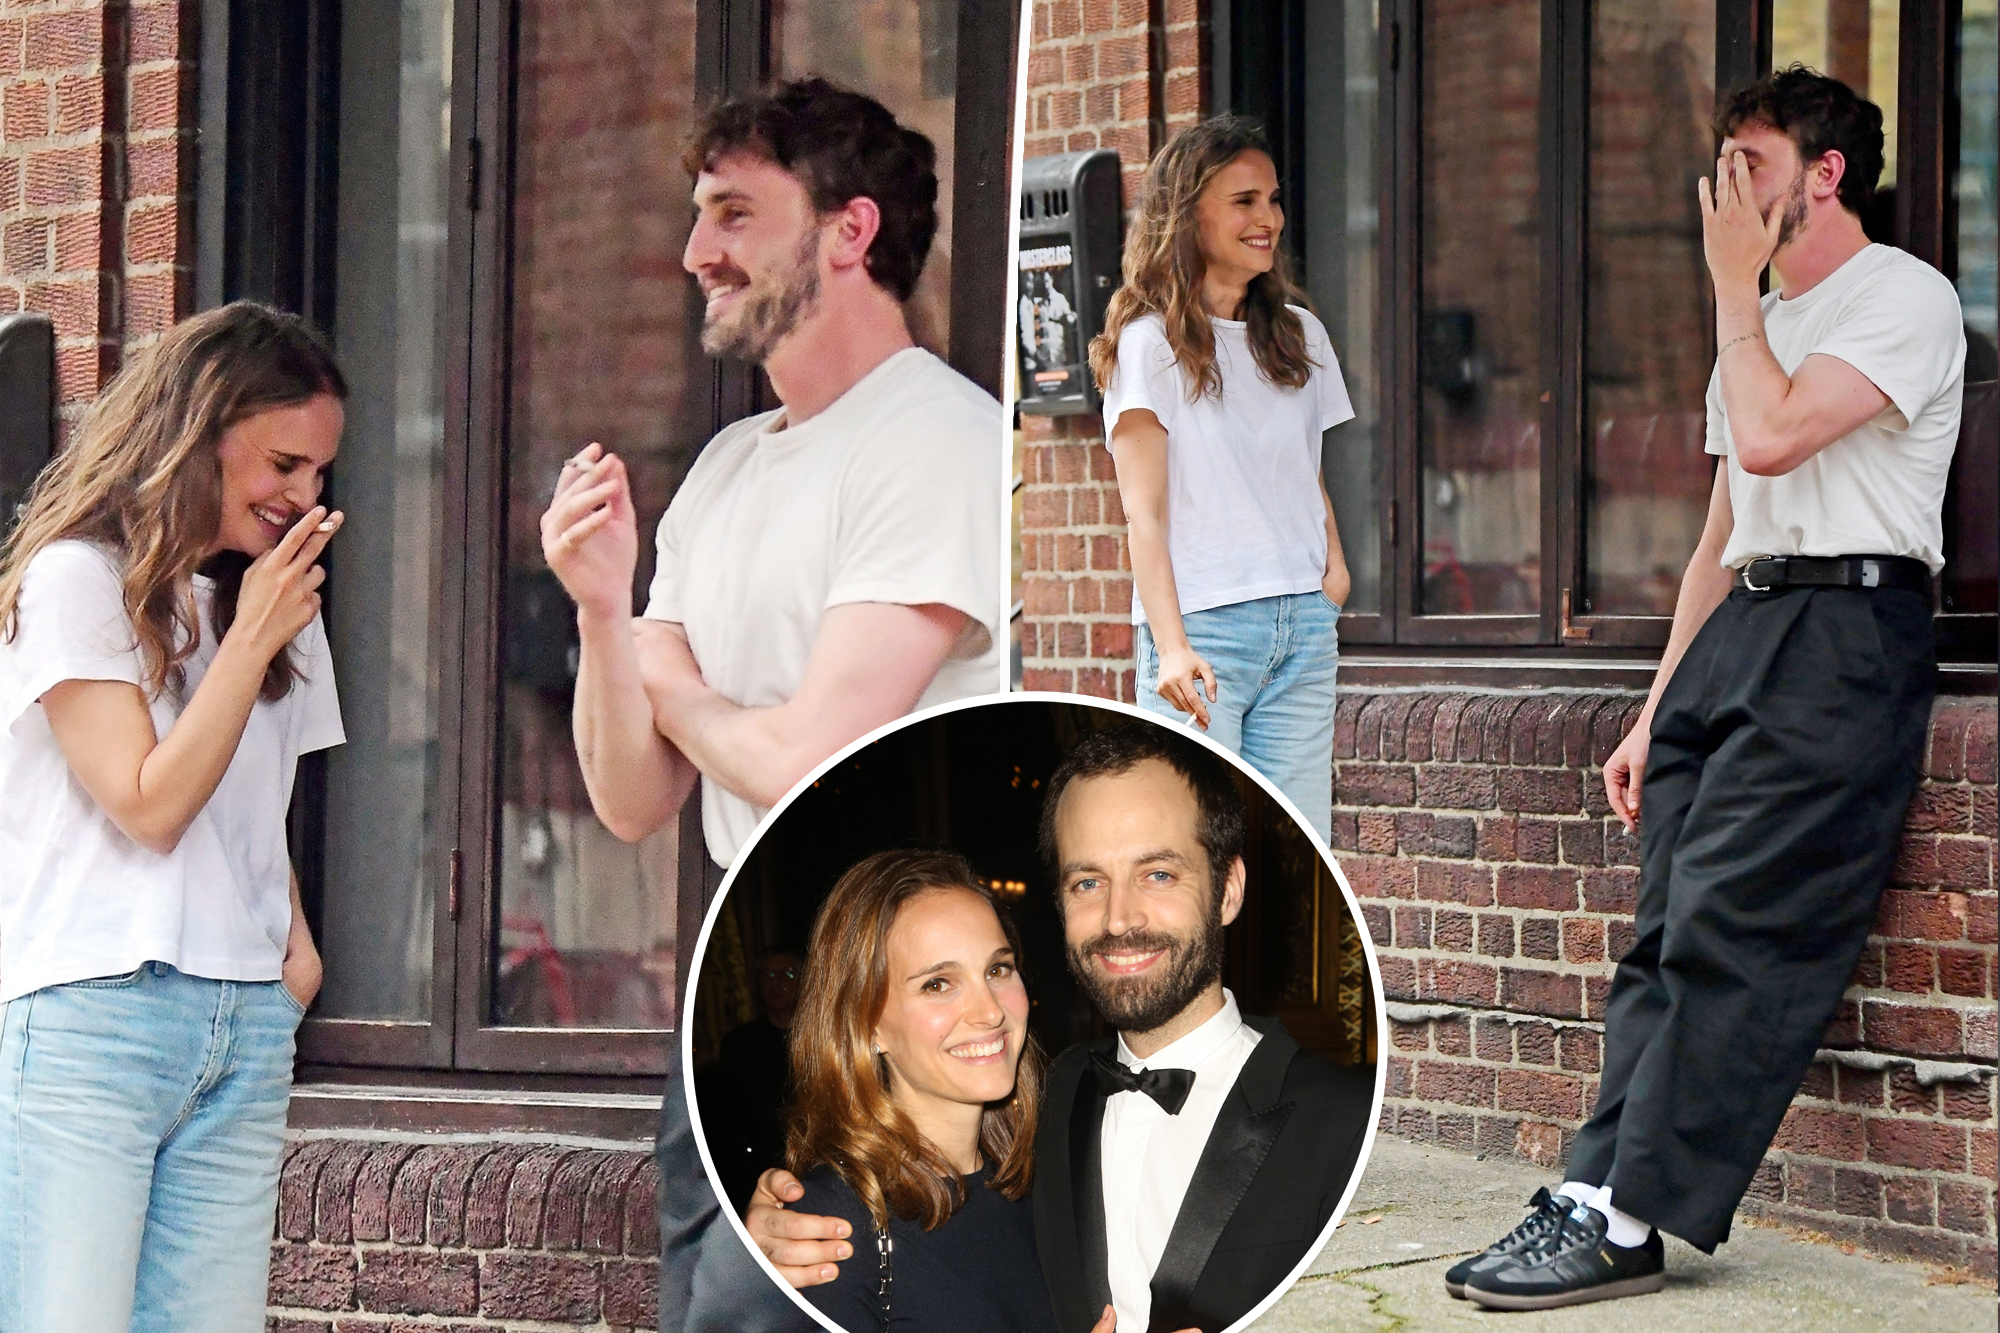 Natalie Portman and Paul Mescal: A New Friendship Blooms in London